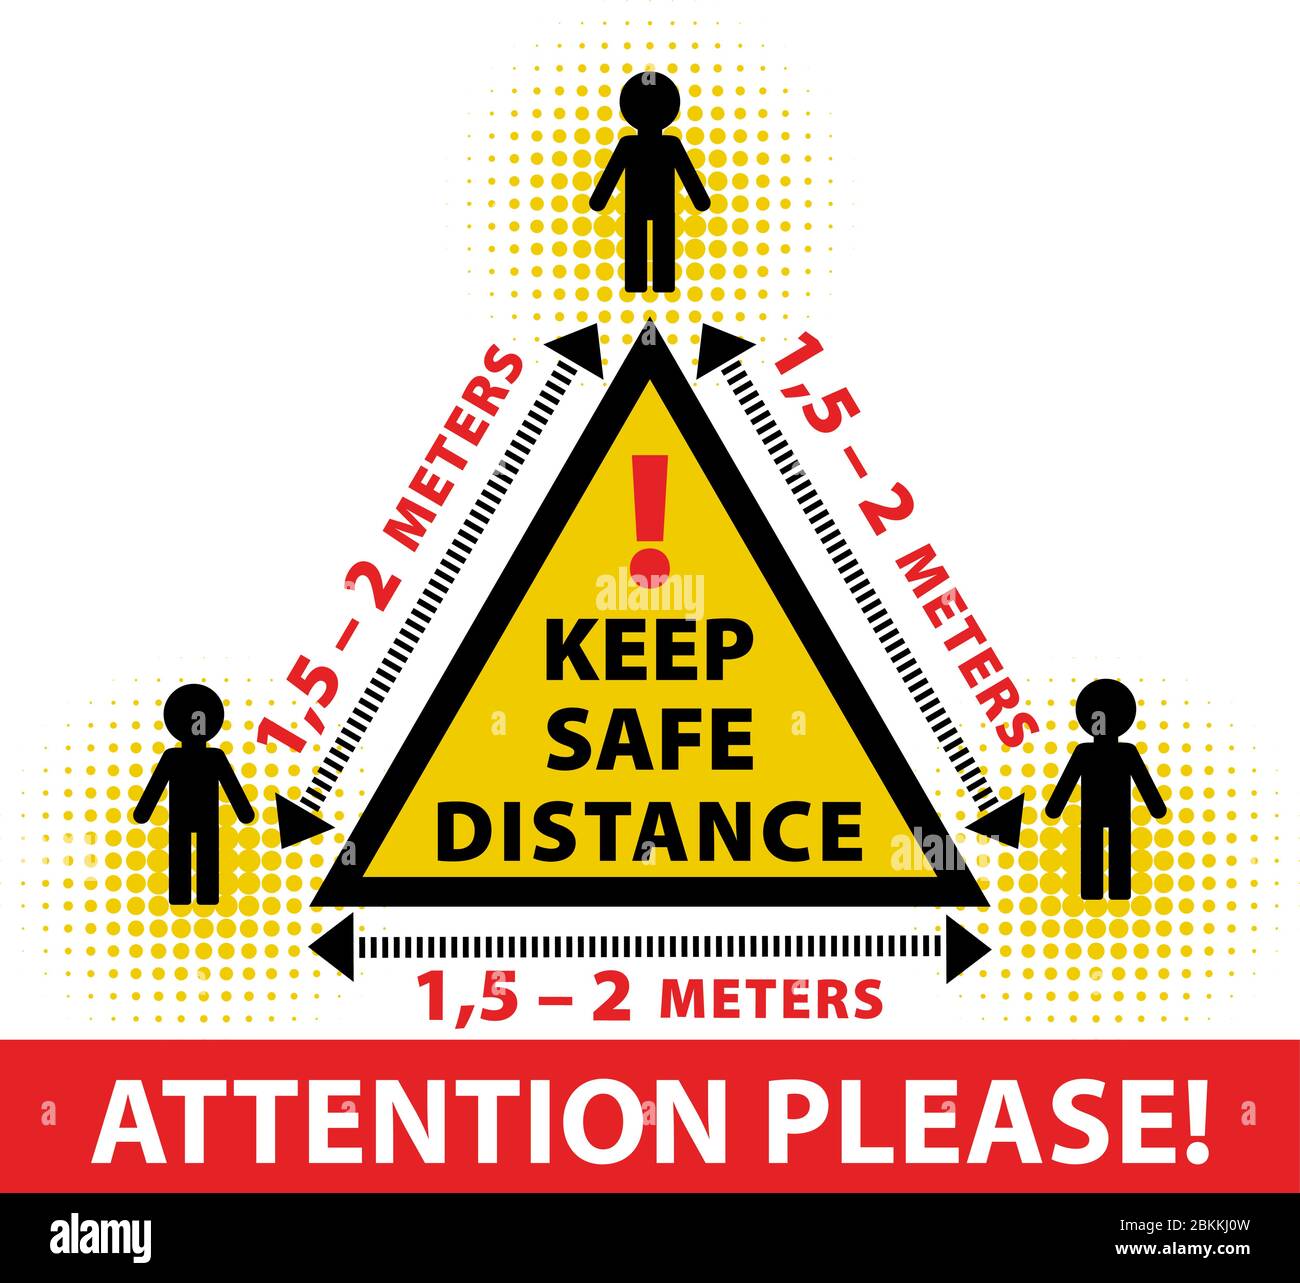 Keep Distance sign. Yellow danger triangle sign. Keep distance at least 1 -2 meters between people. Stopping spread of virus. Information warning sign Stock Vector